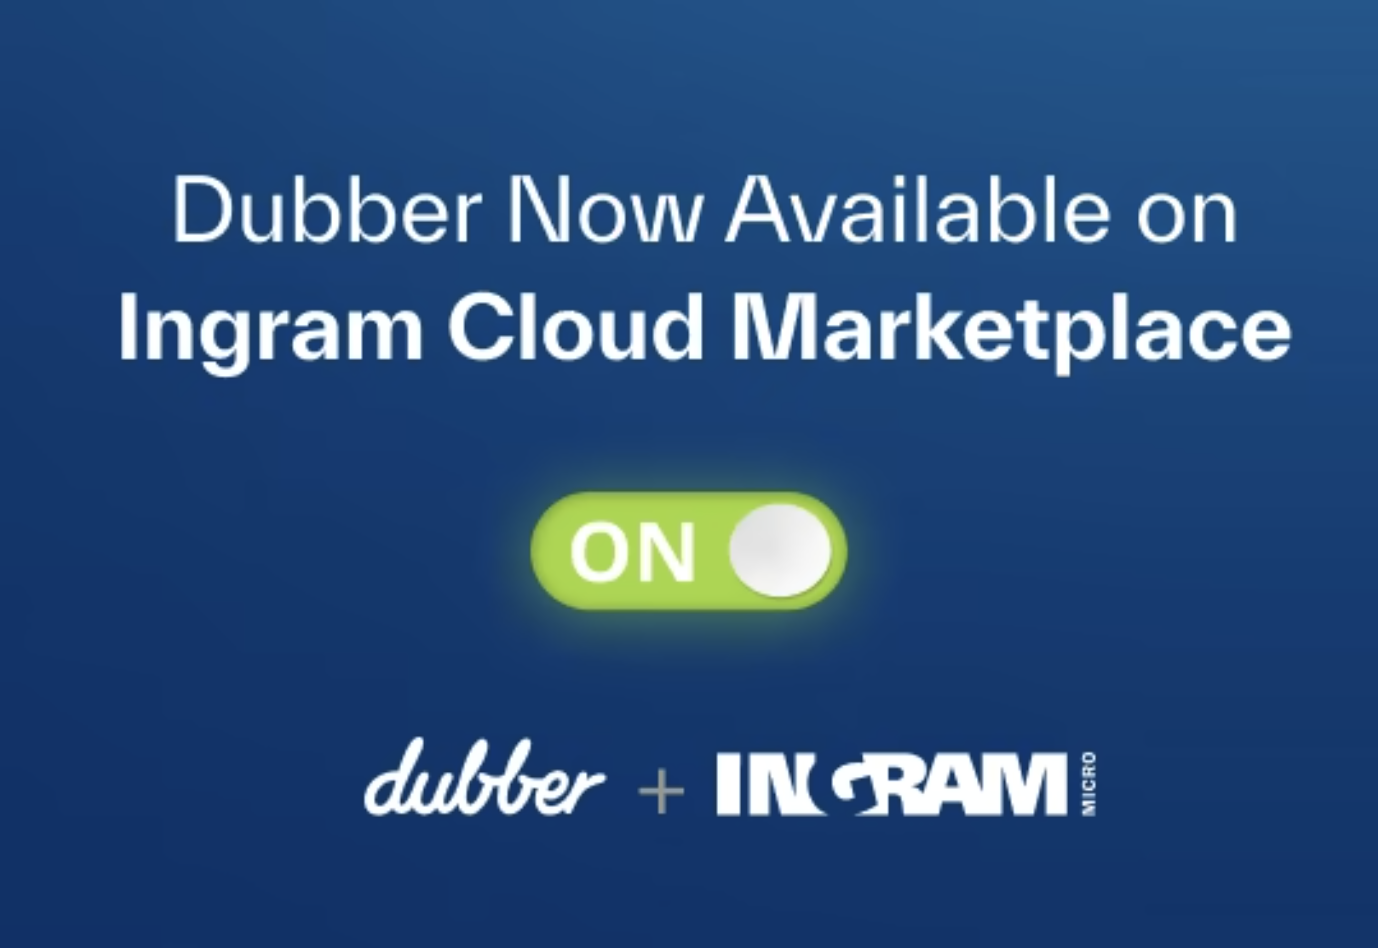 Dubber Now Available on Ingram Cloud Marketplace